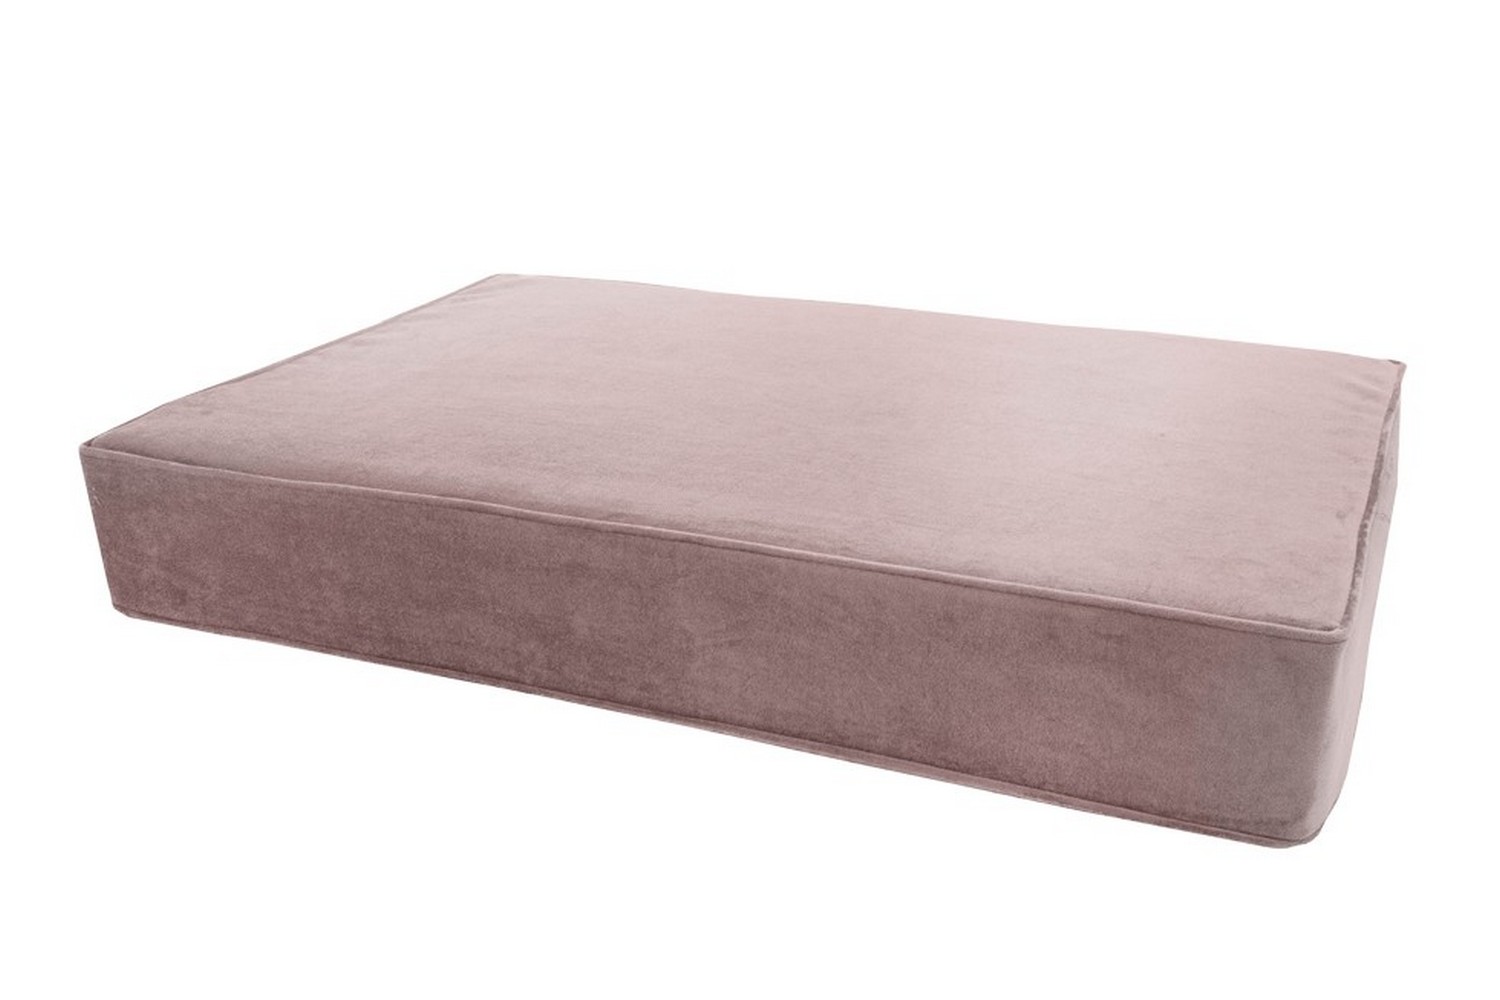 SQUARE ANTI-BEDSORE CUSHION WITH 2 LAYERS OF FOAM